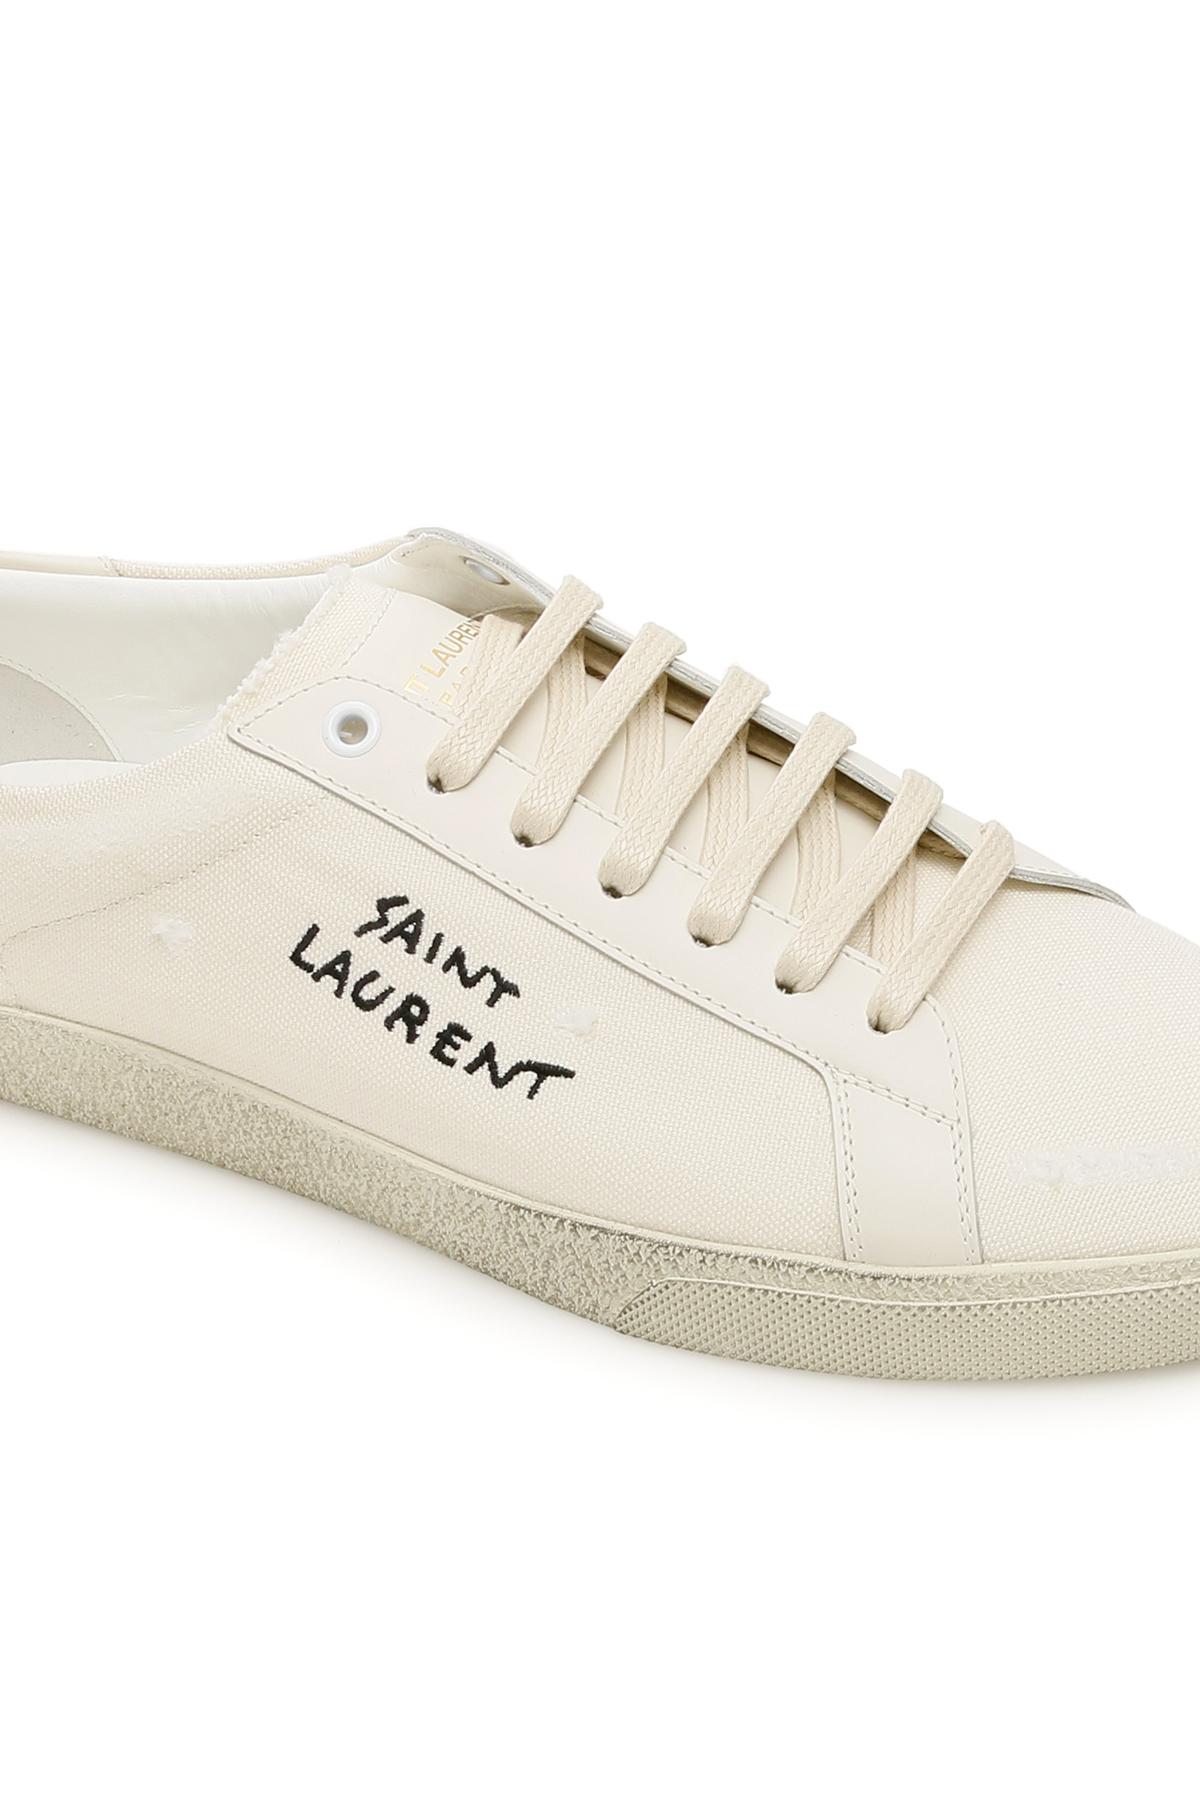 Saint Laurent Canvas Sneakers With Logo in White,Beige (Natural) for